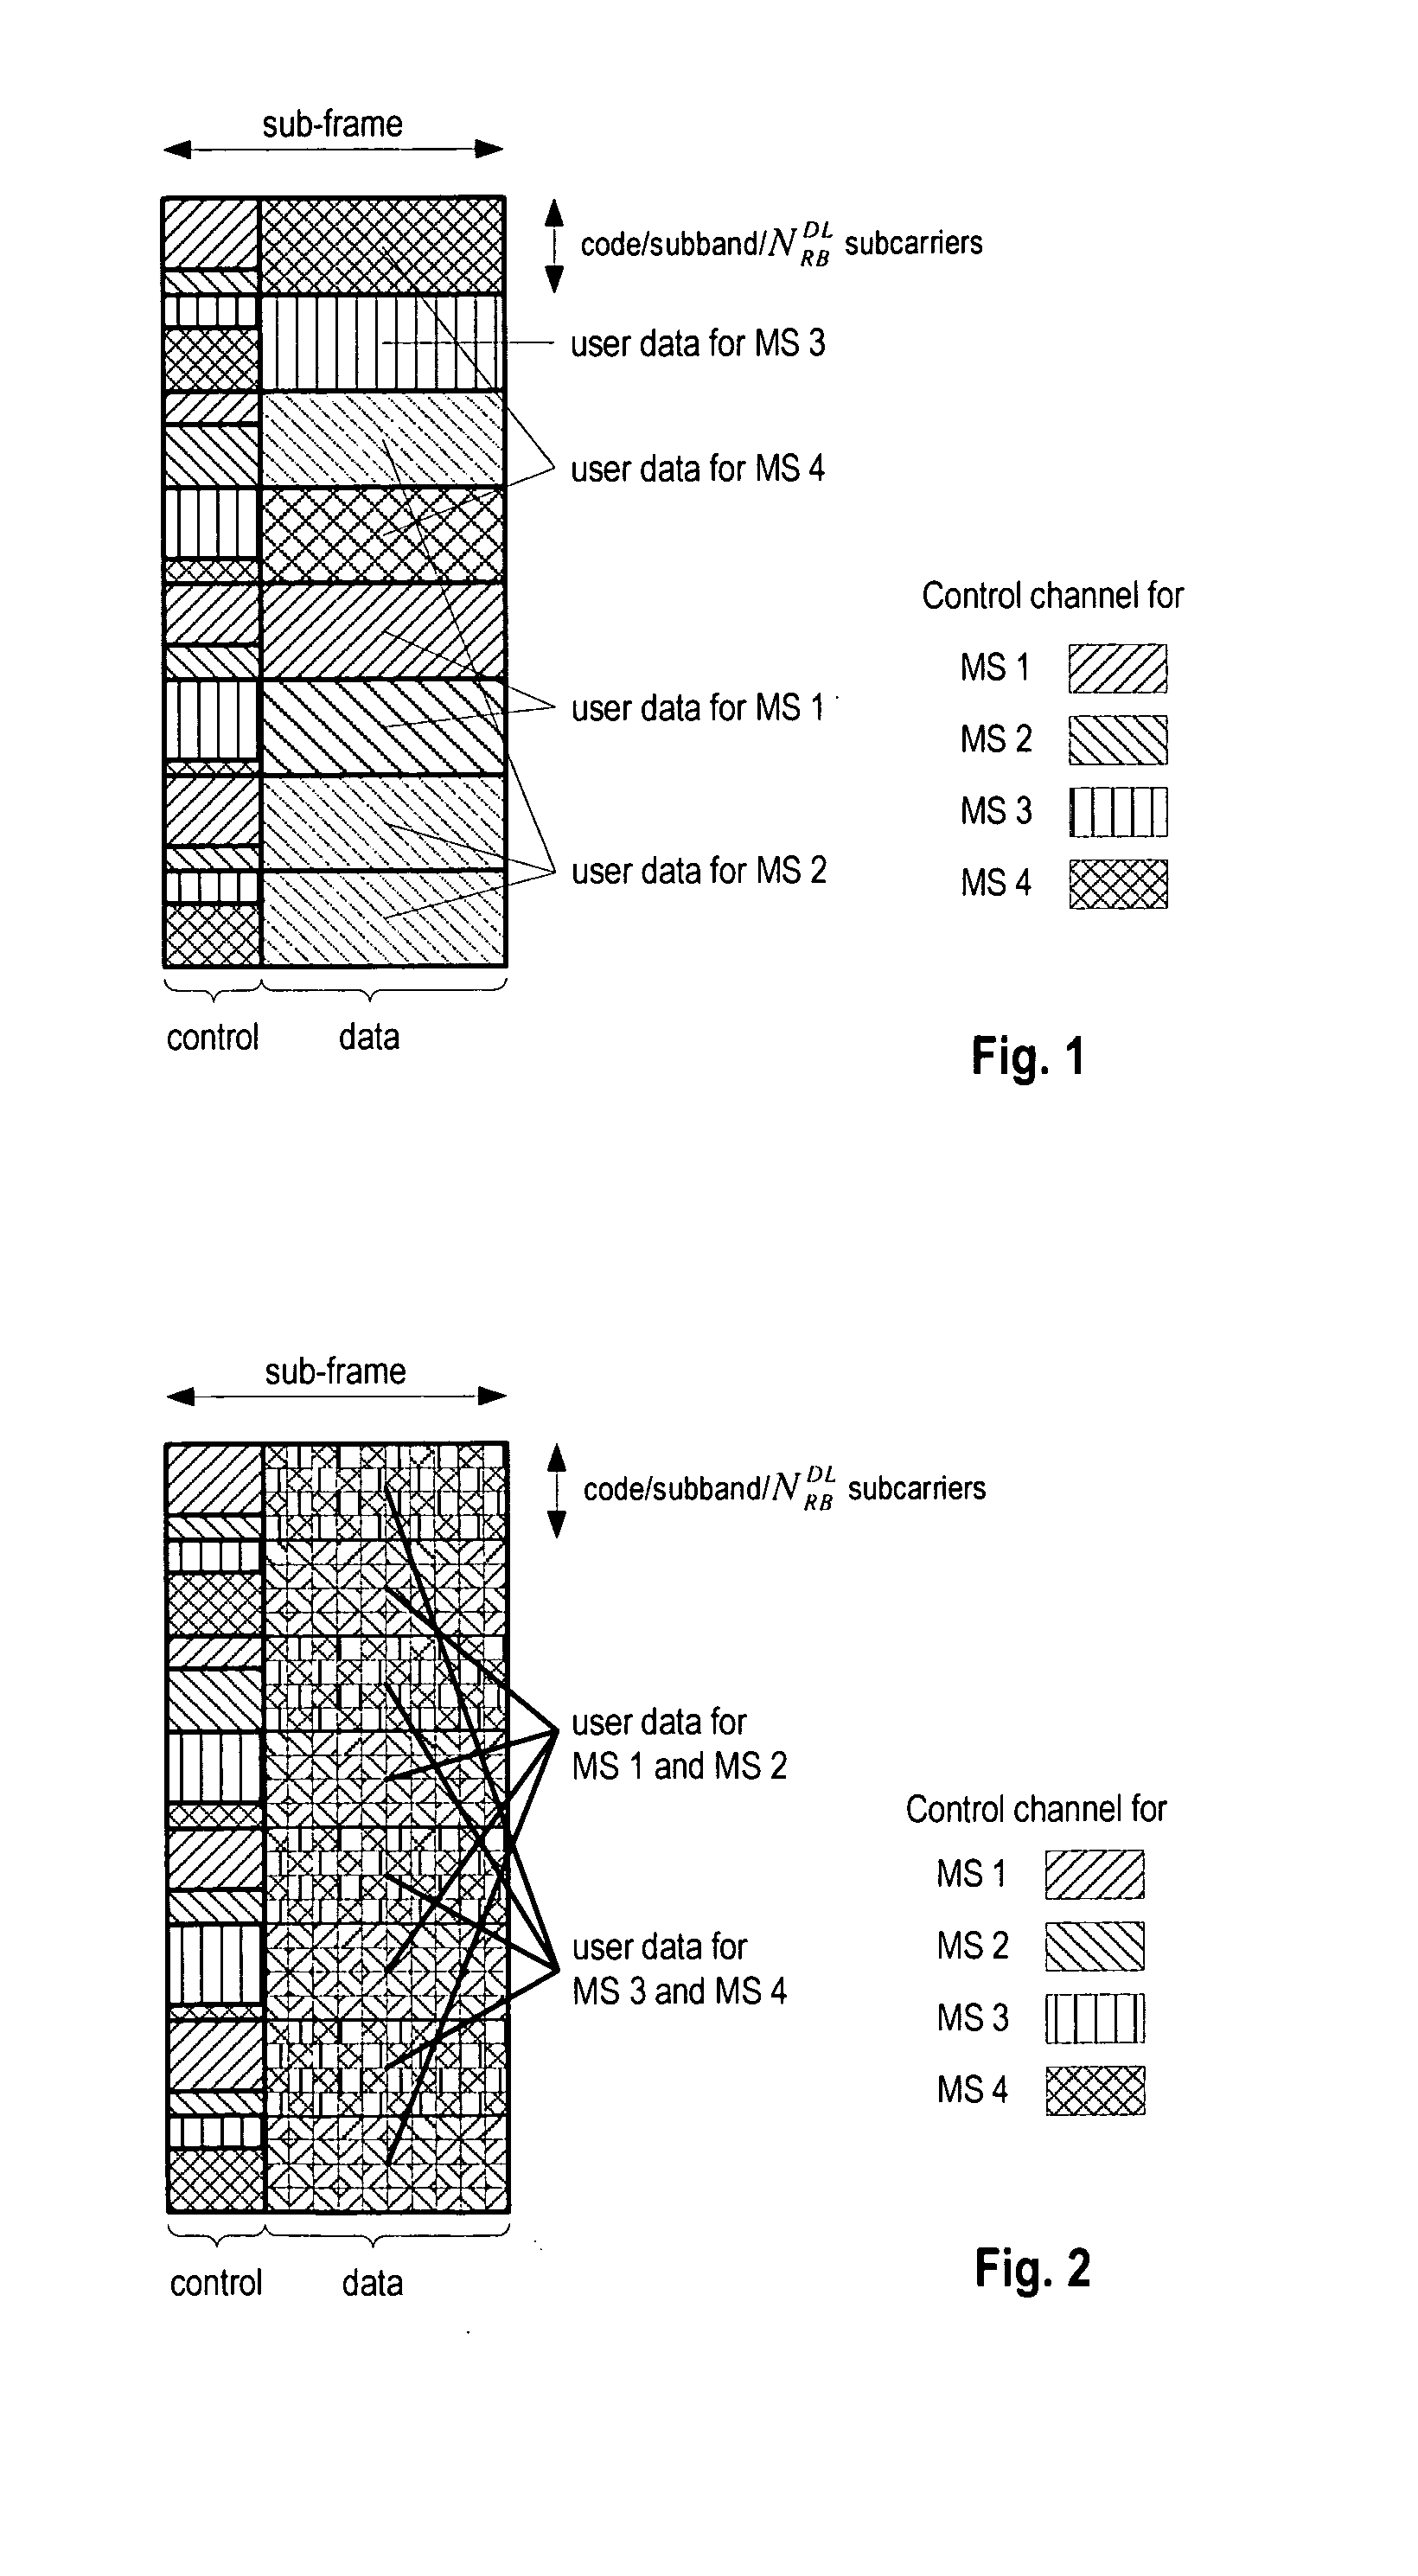 Configuration of control channels in a mobile communication system